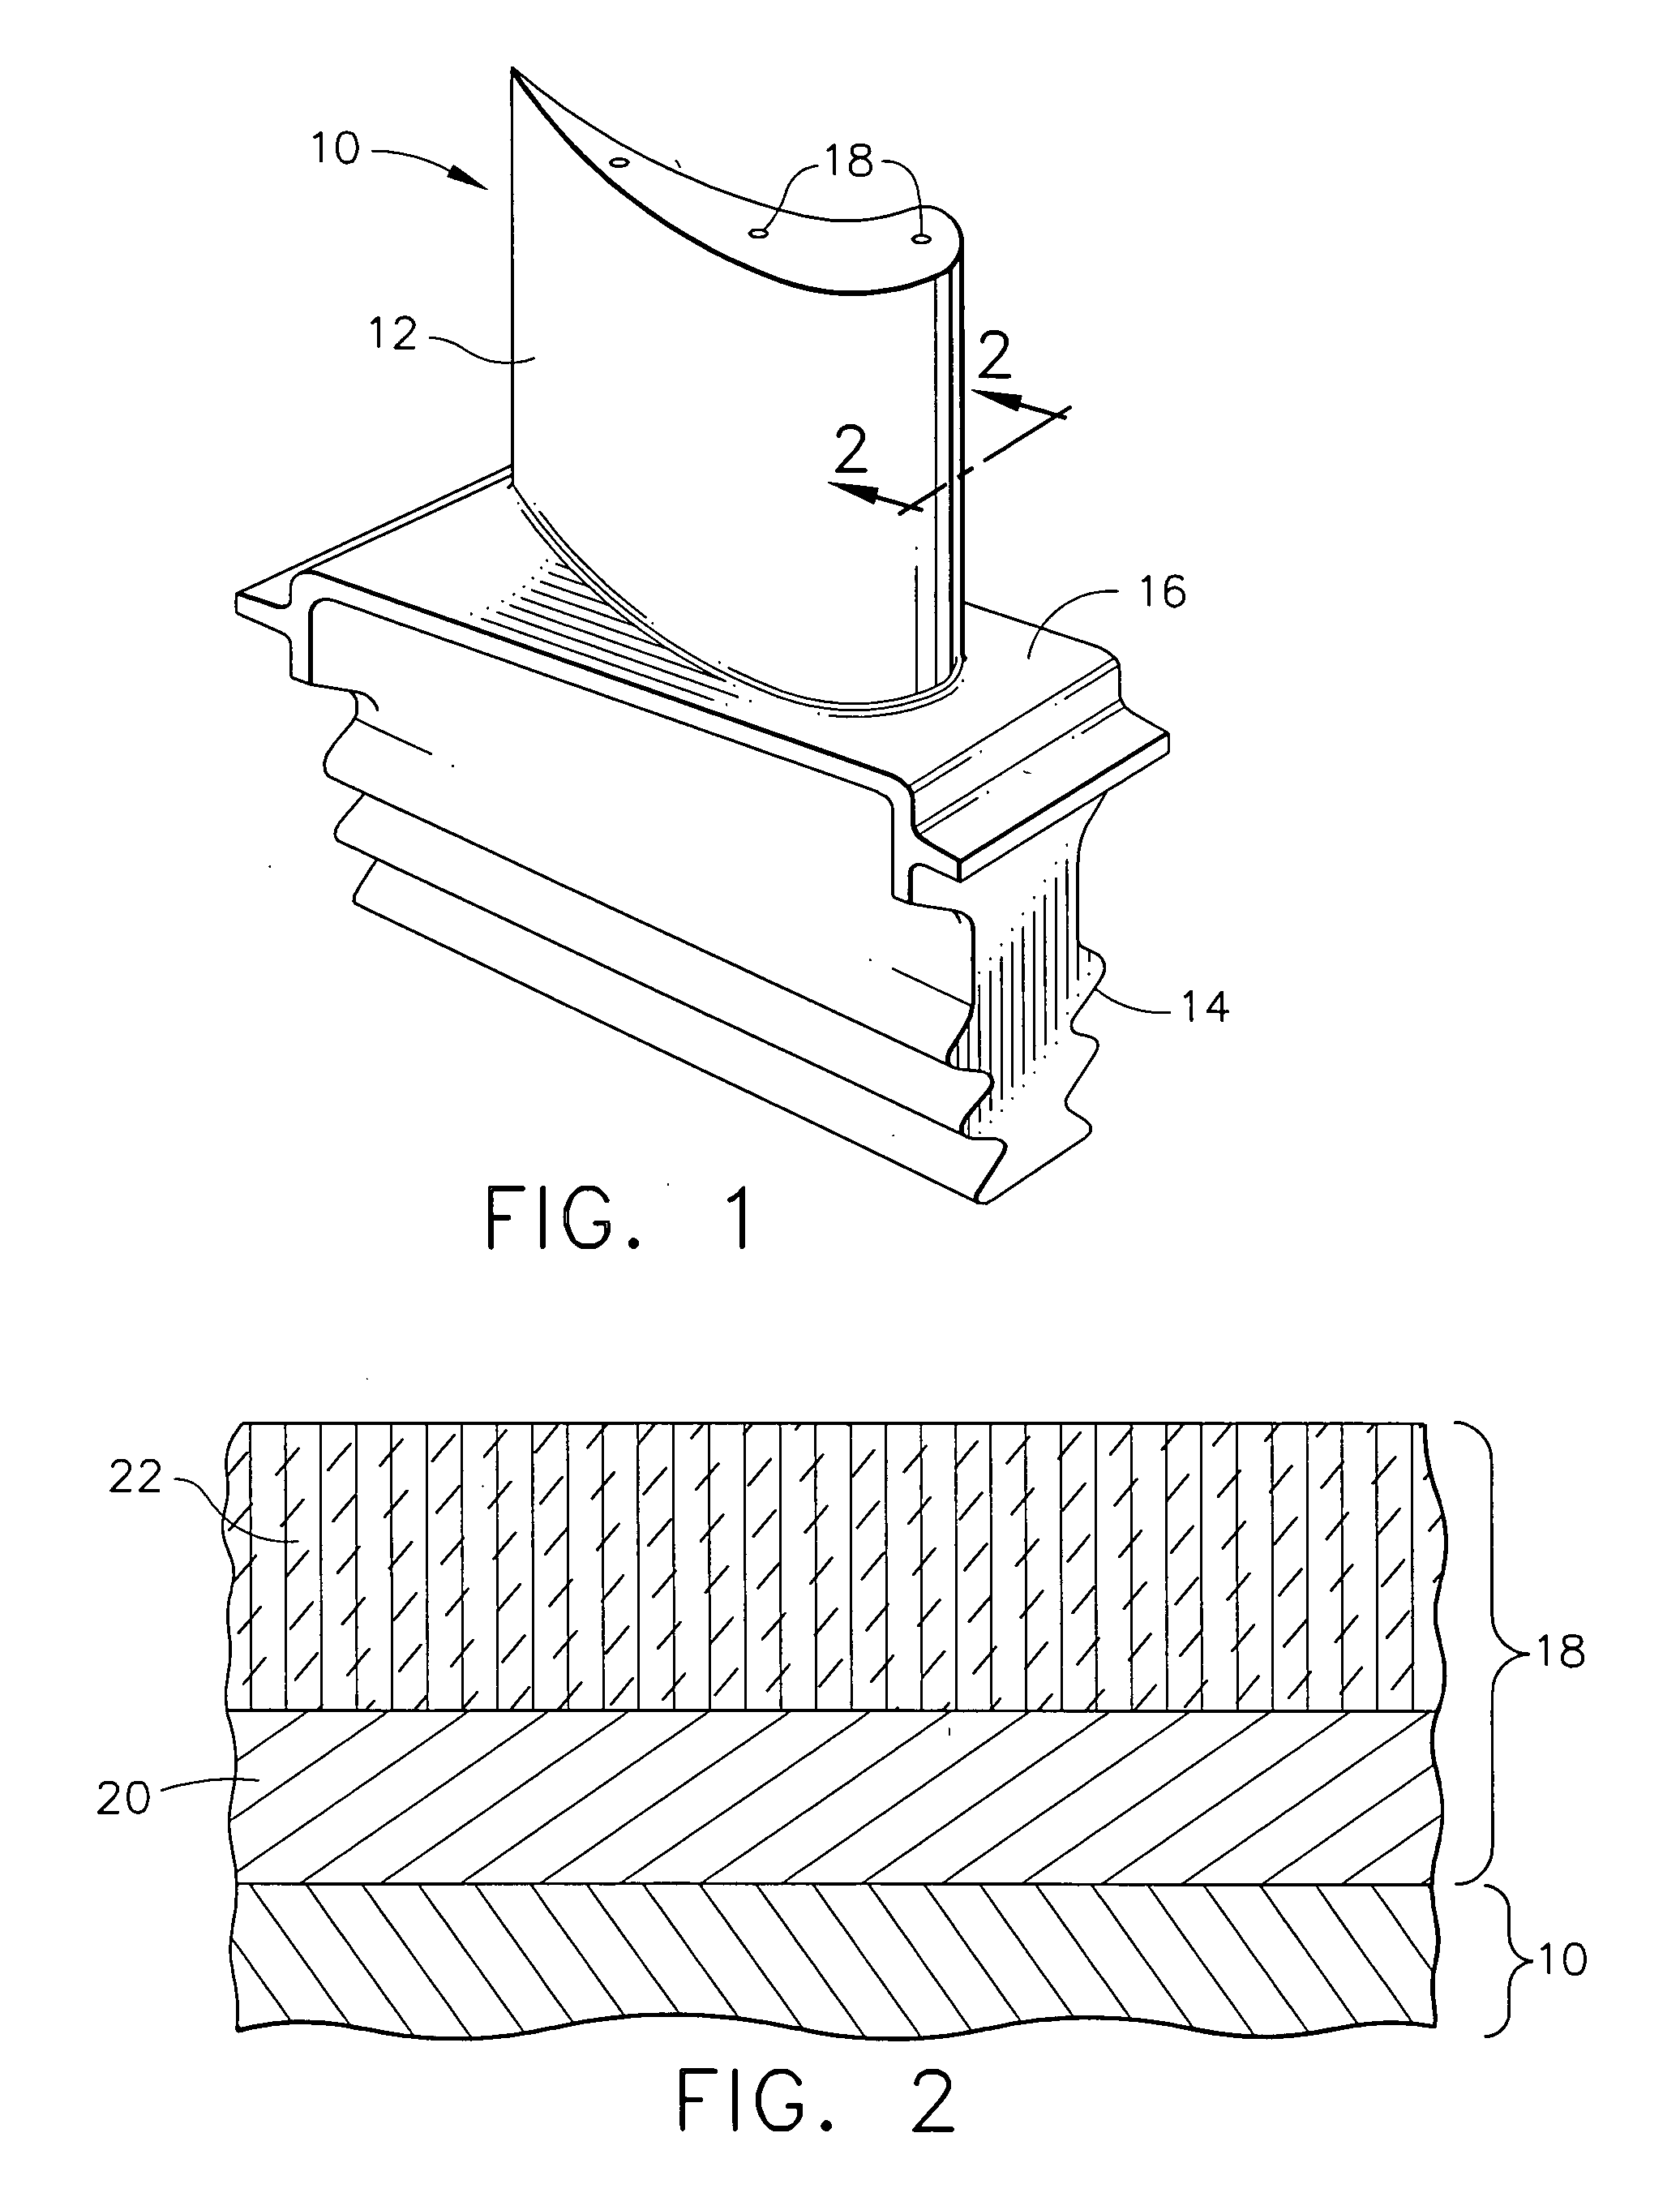 Method for repairing coated components